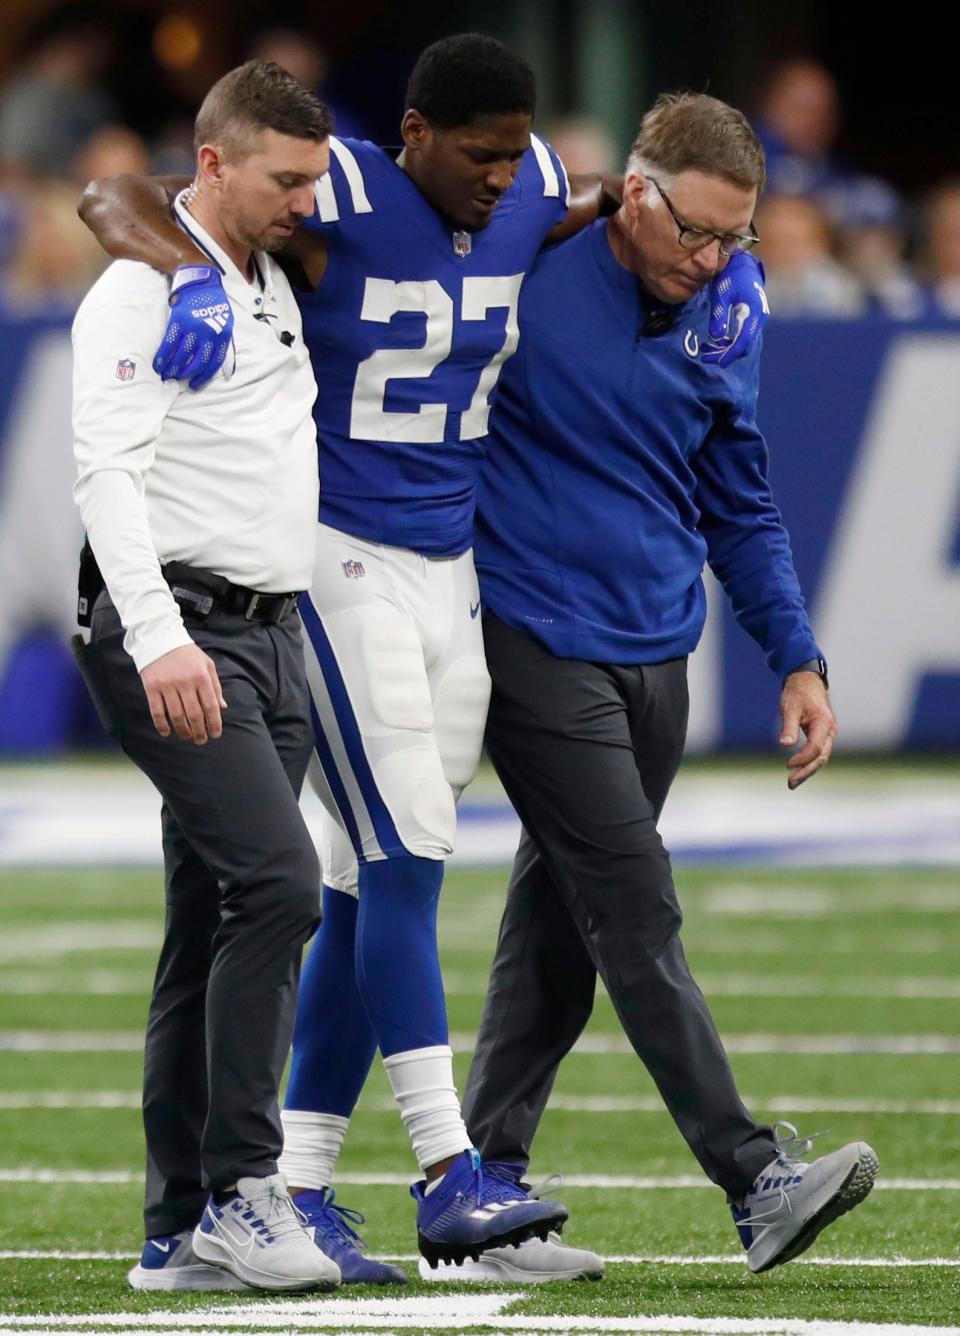 Indianapolis Colts cornerback Xavier Rhodes (27) is helped off the field after an injury Sunday, Jan. 2, 2022, during a game against the Las Vegas Raiders at Lucas Oil Stadium in Indianapolis.